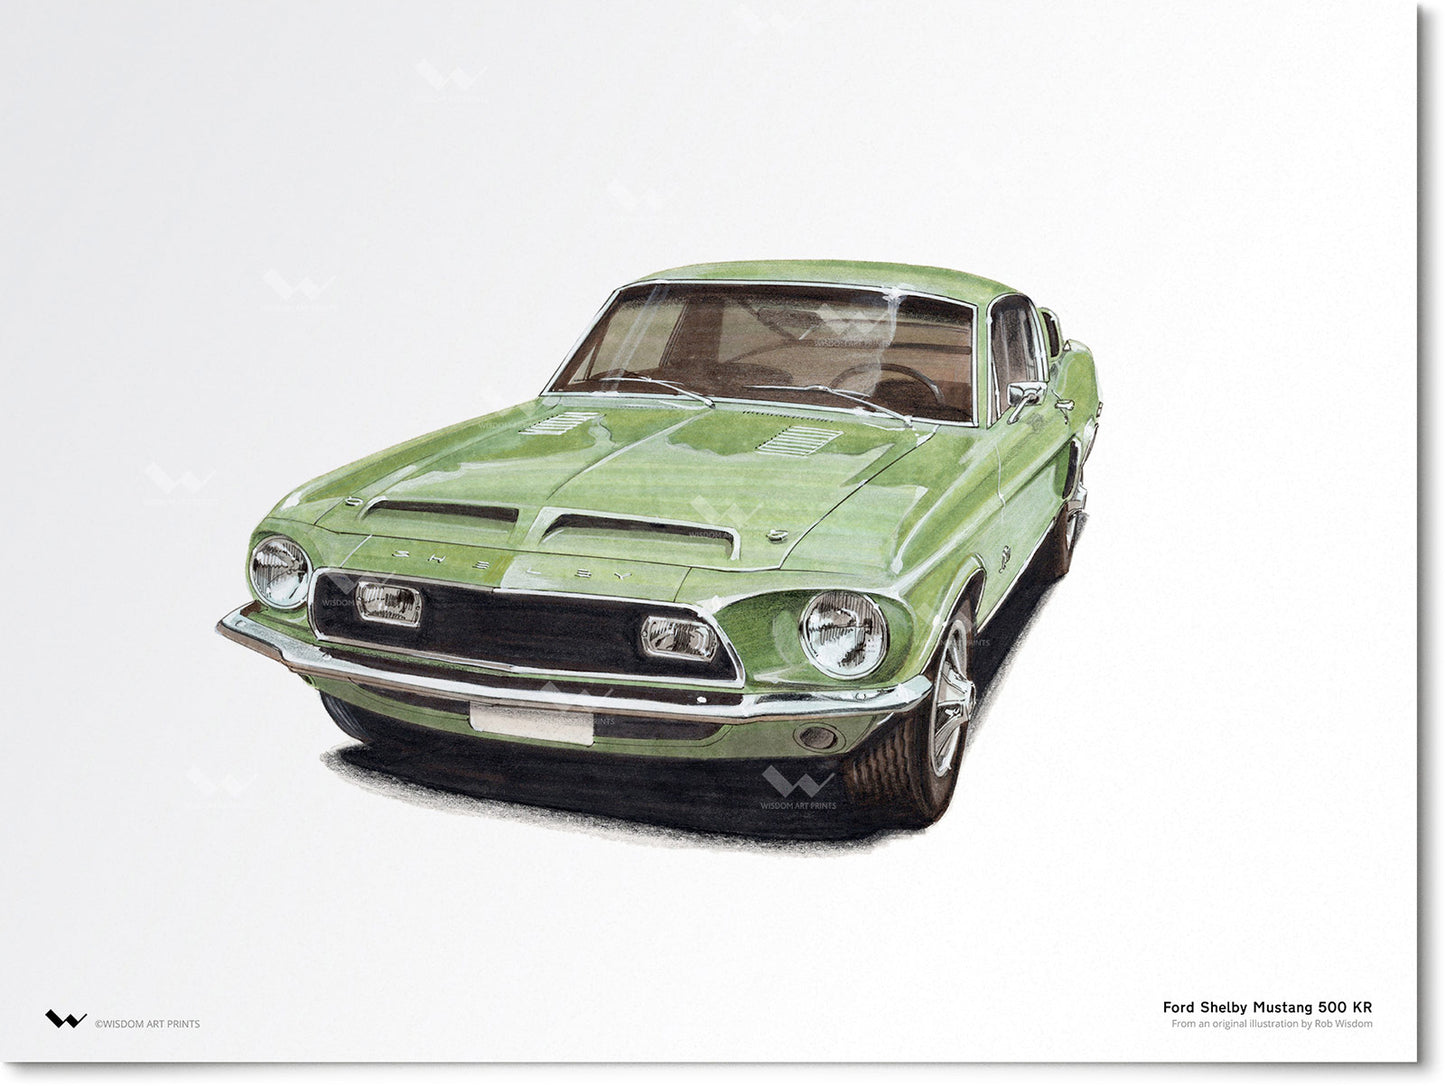 Ford Shelby Mustang 500 KR